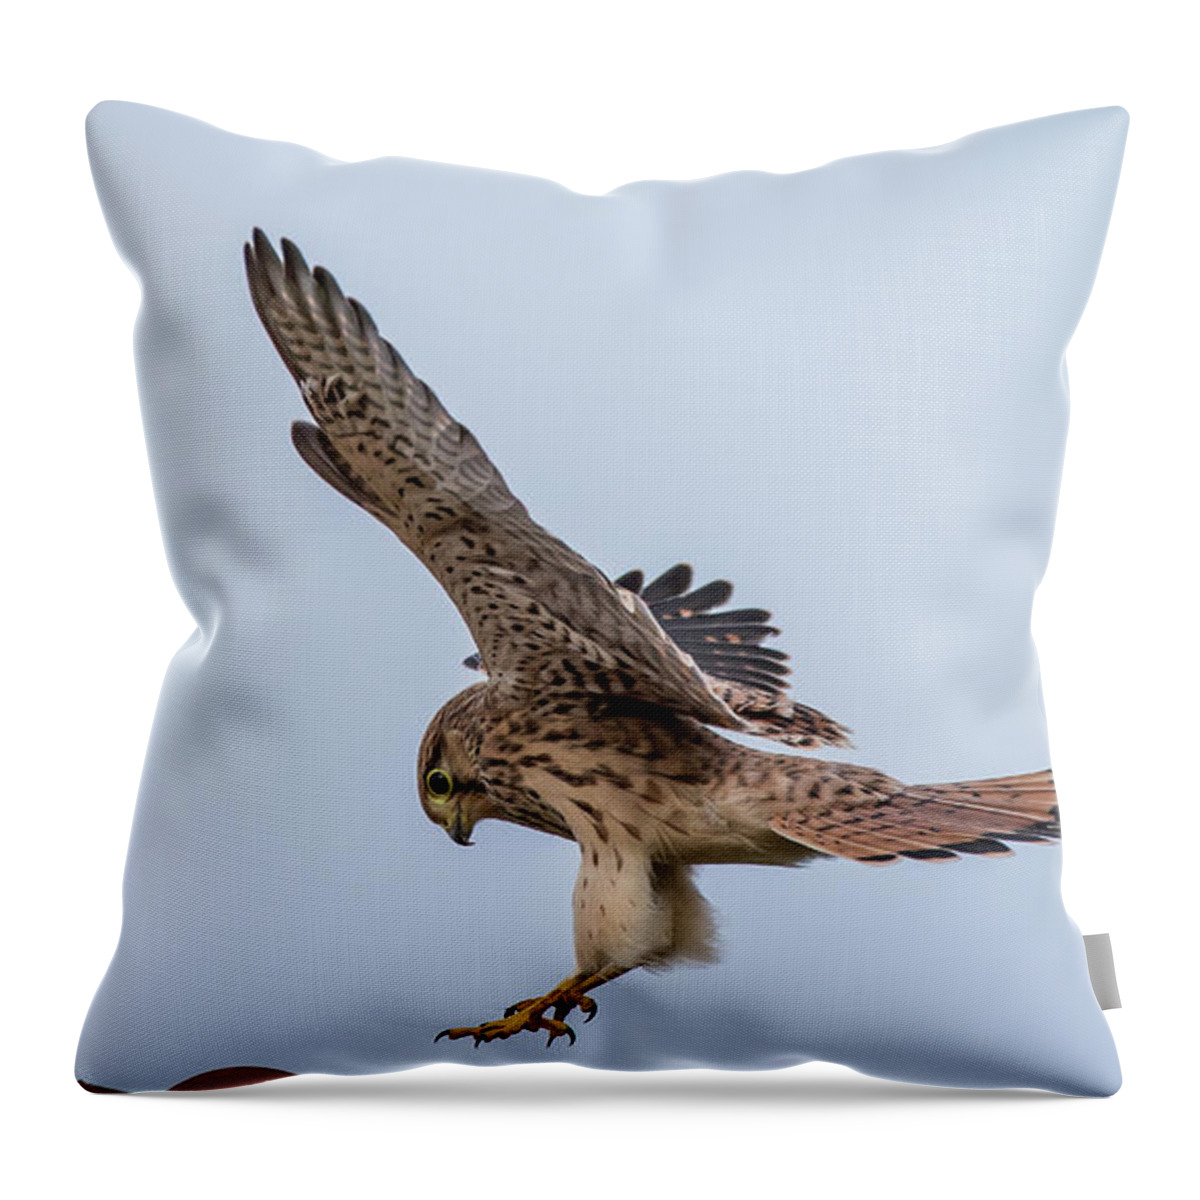 Kestrel Throw Pillow featuring the photograph Young European Kestrel Landing by Torbjorn Swenelius